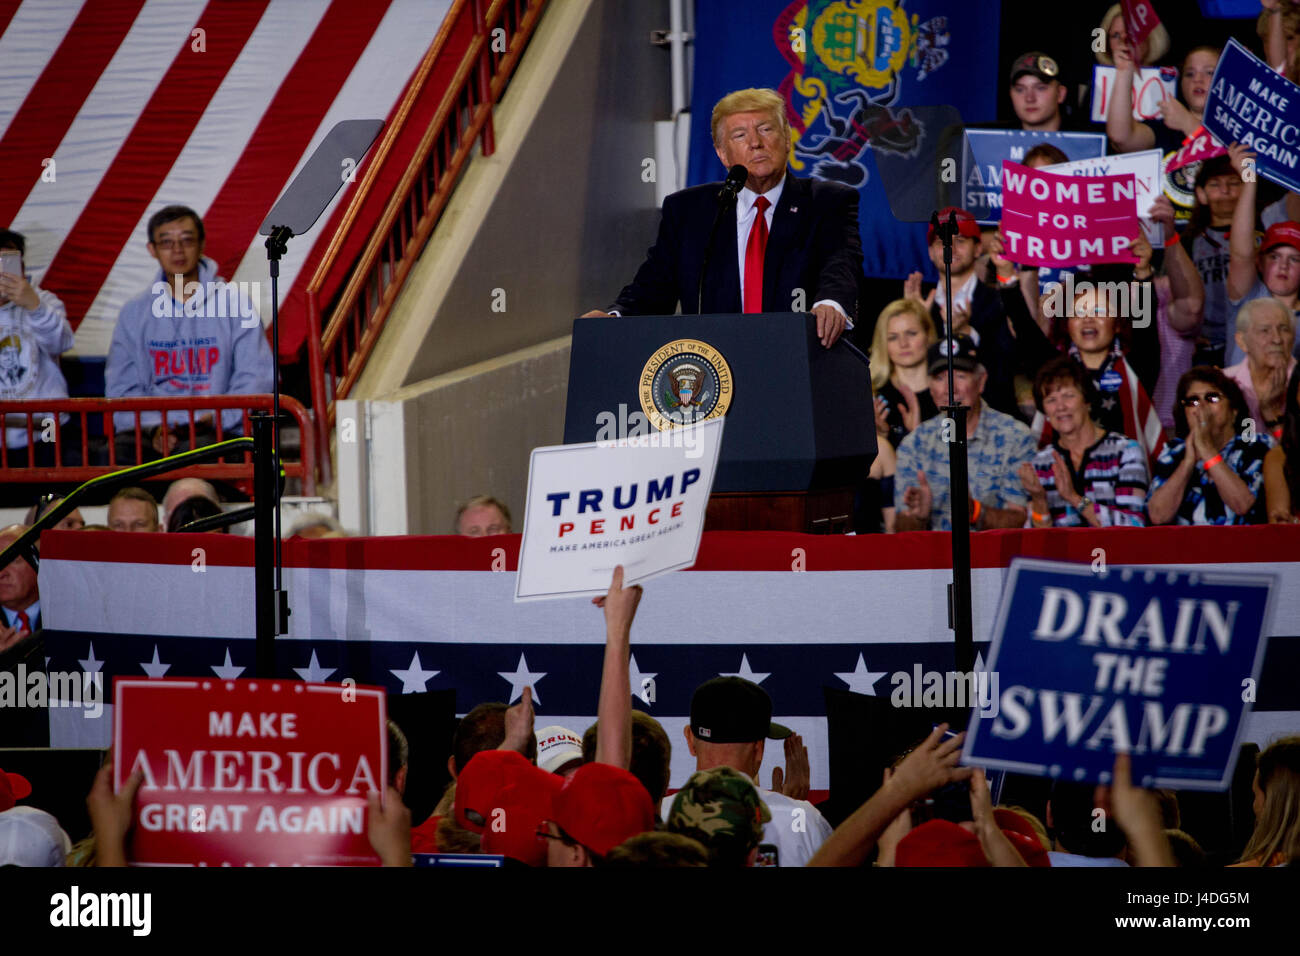 President Donald Trump addresses a rally held in Harrisburg, PA to commemorate his 100th day in office, Saturday, April 29, 2017. Stock Photo